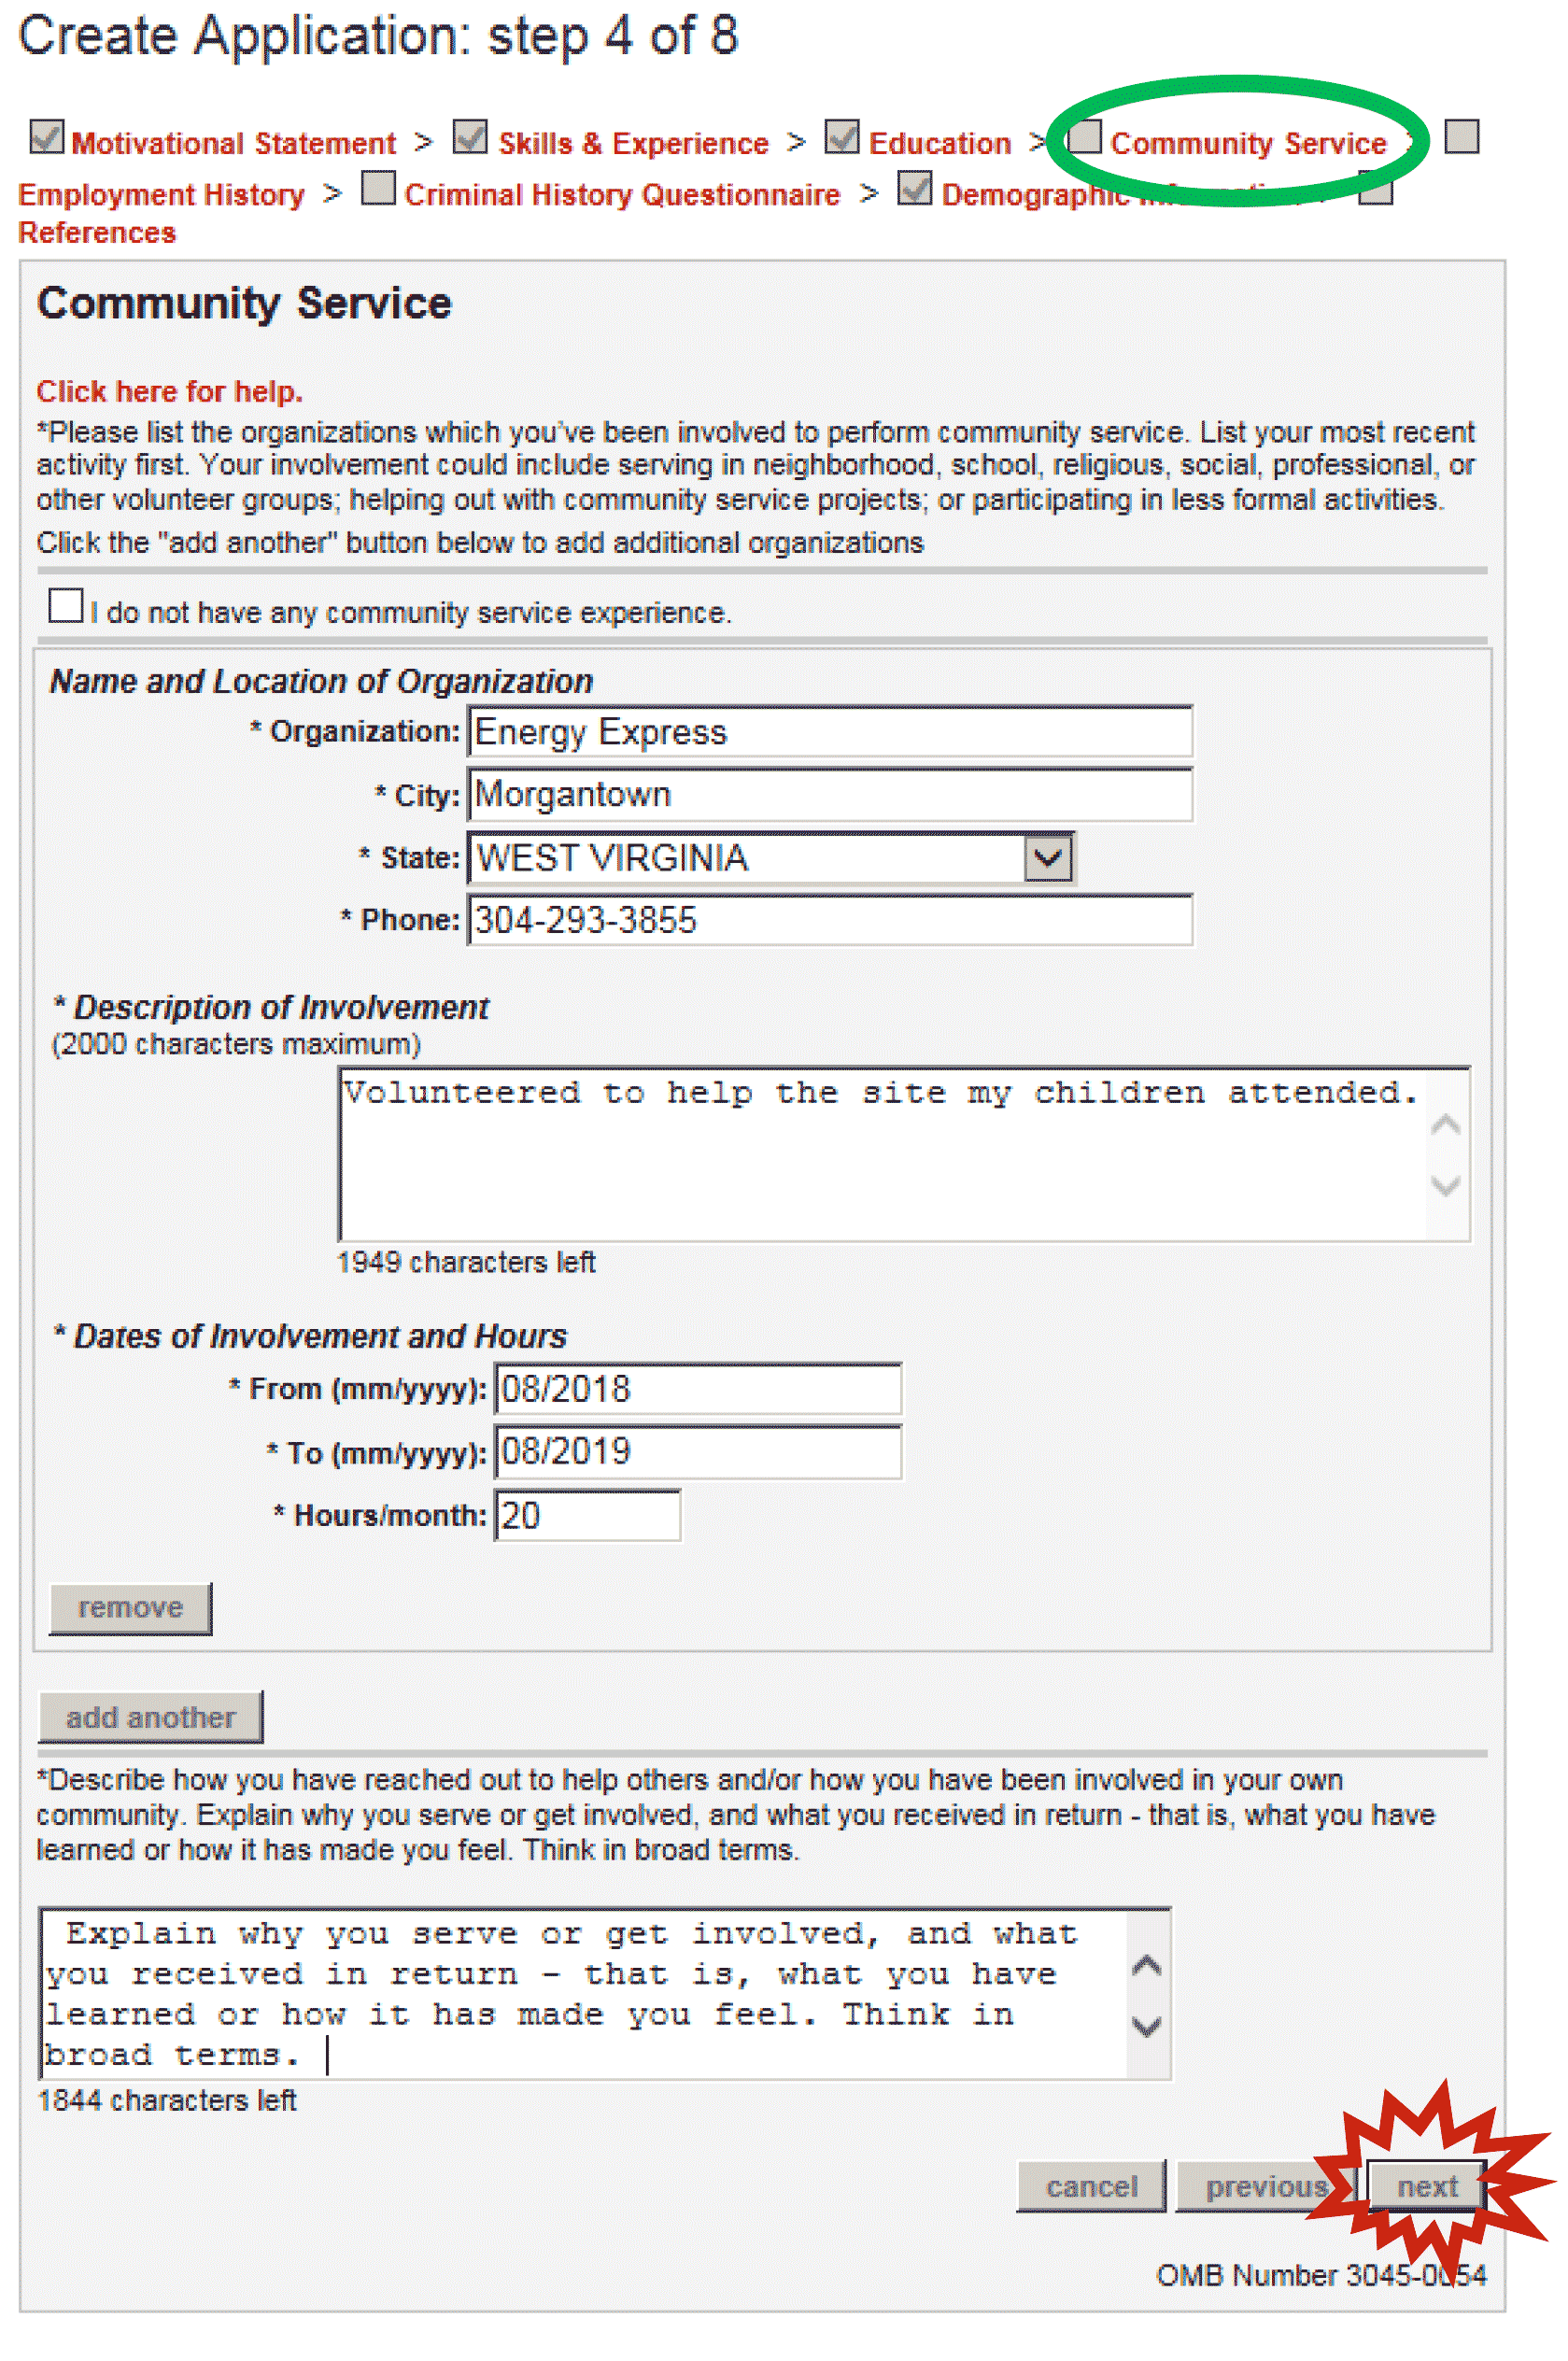 AmeriCorps application step 4: click the Community Service Checkbox and then click Next.